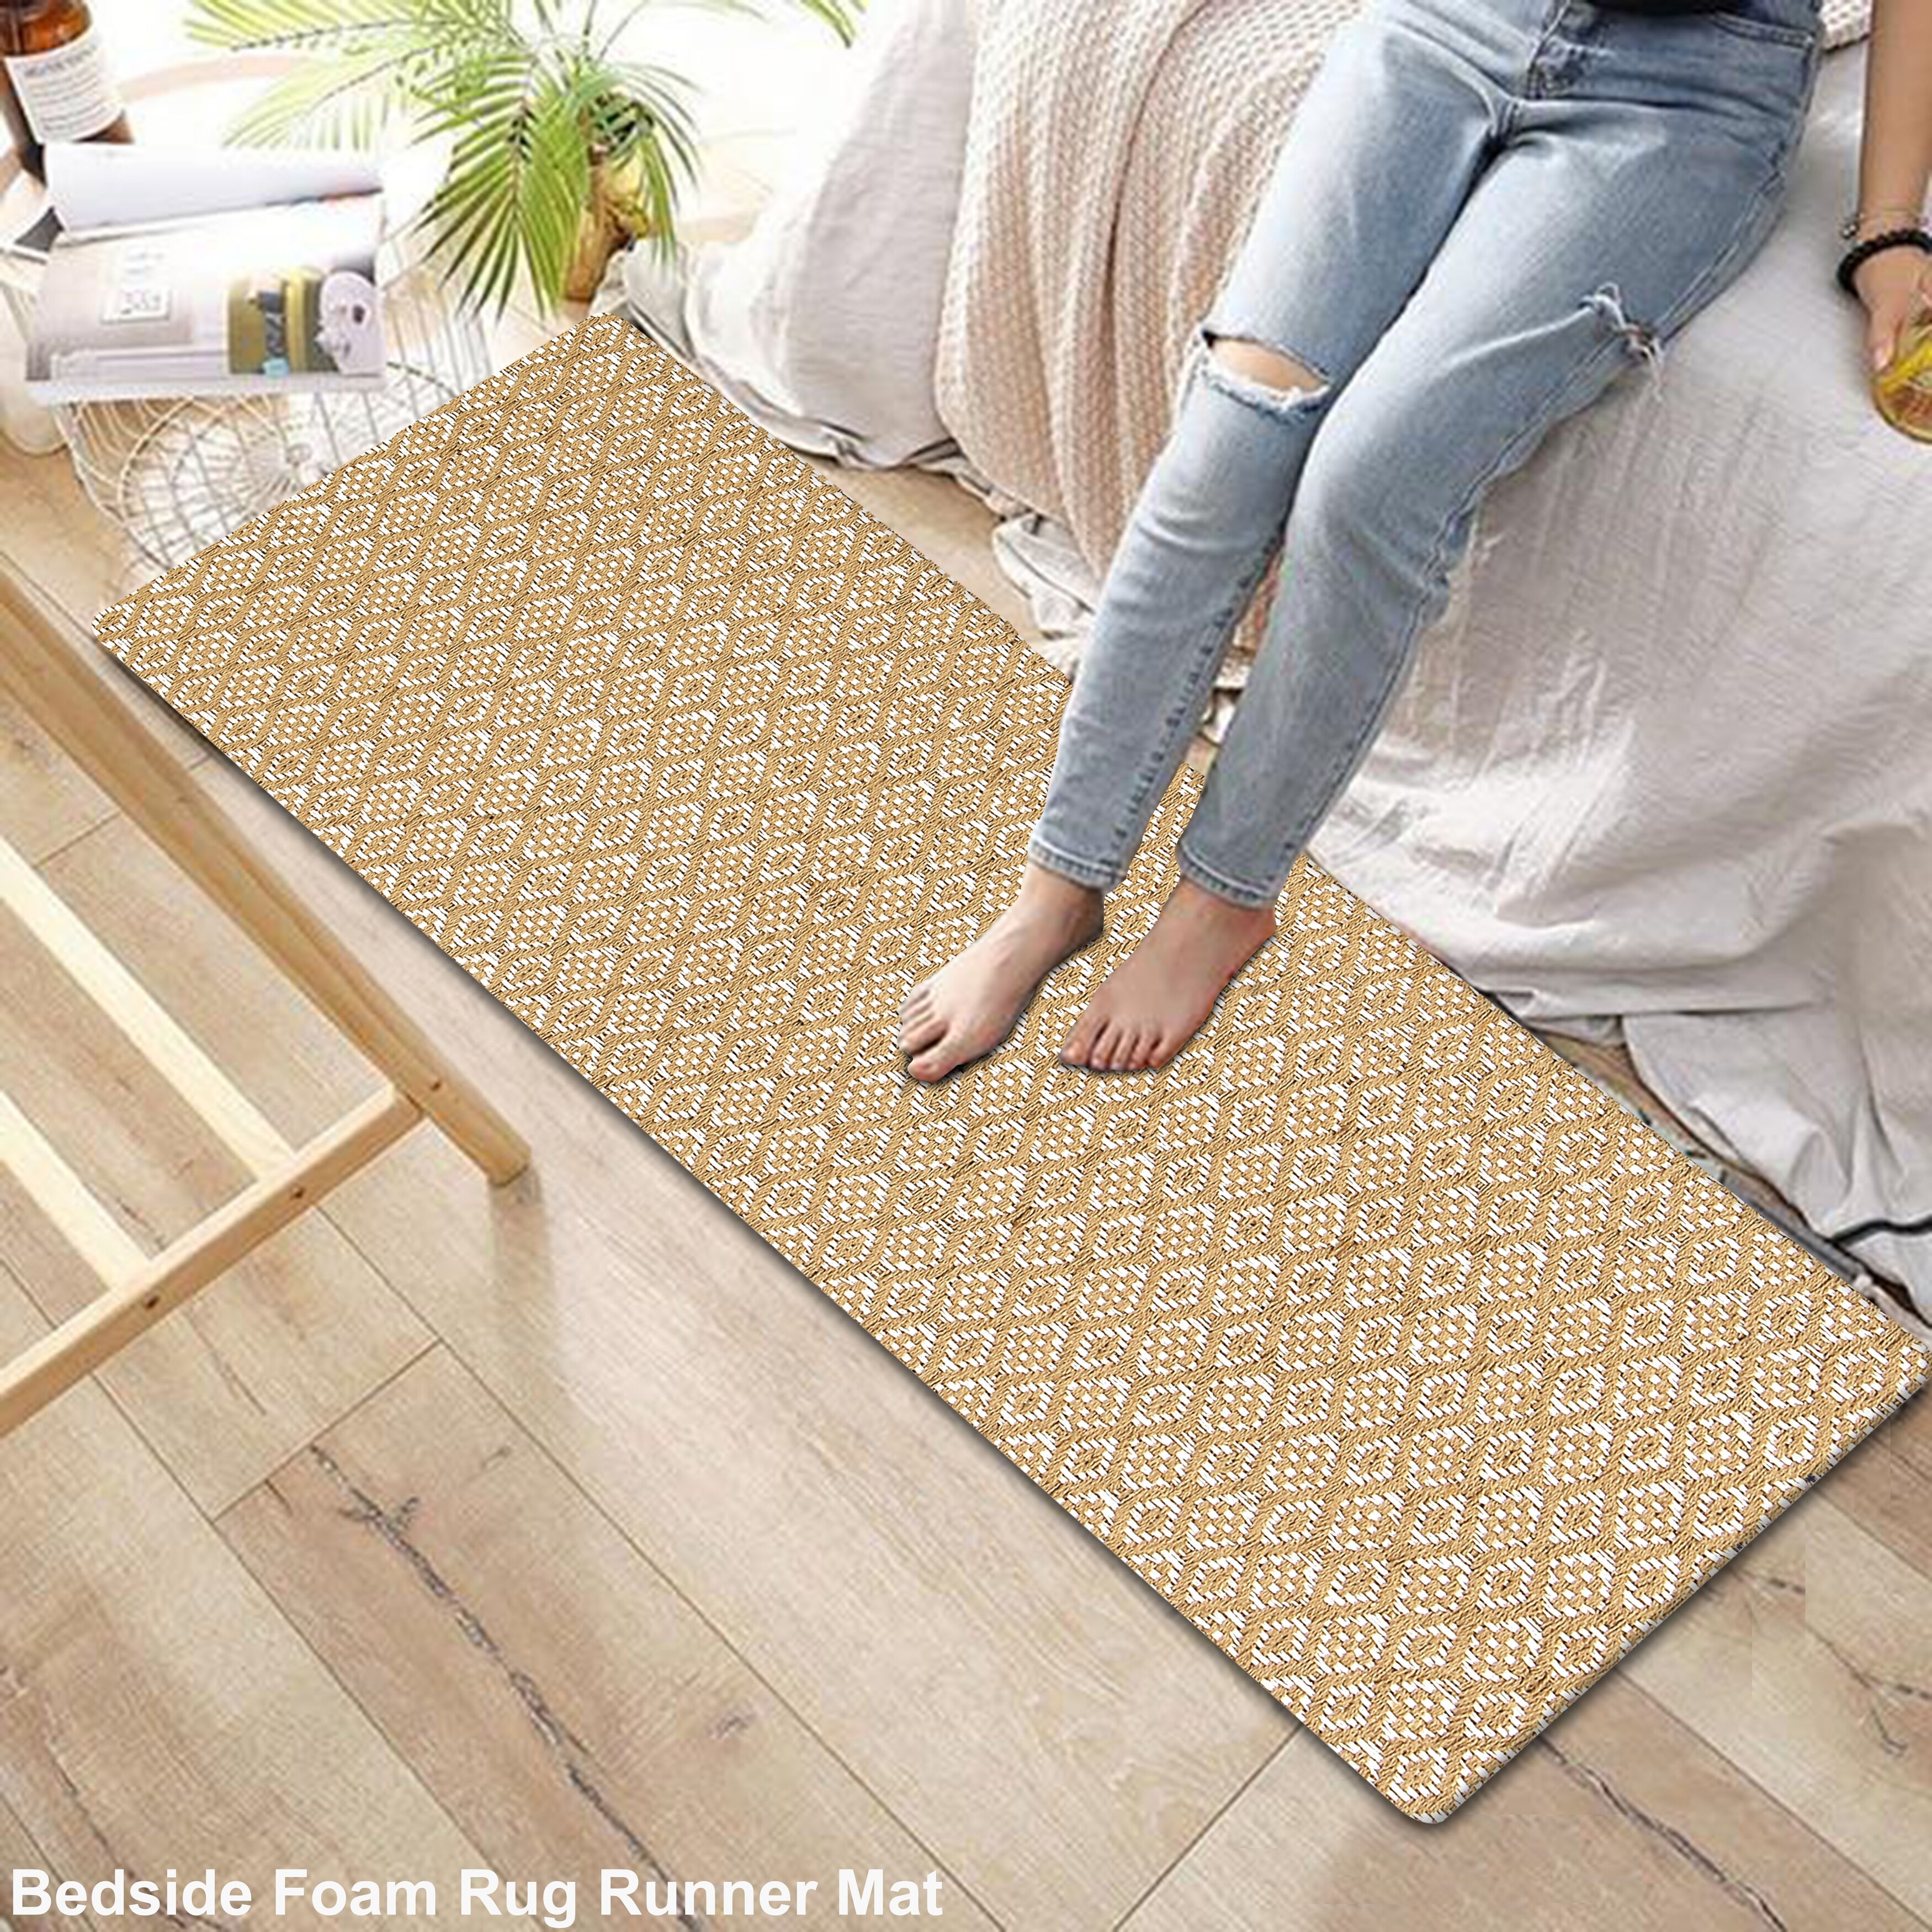 https://ak1.ostkcdn.com/images/products/is/images/direct/c1fd28bfe5264e0b73fb1a6e0b446c9bb716f88f/Anti-Fatigue-Kitchen-Bathroom-Bed-side-Mat-Hand-Woven-Runner-Rug-Cushioned-Cotton-Mat-18x48%27%27.jpg